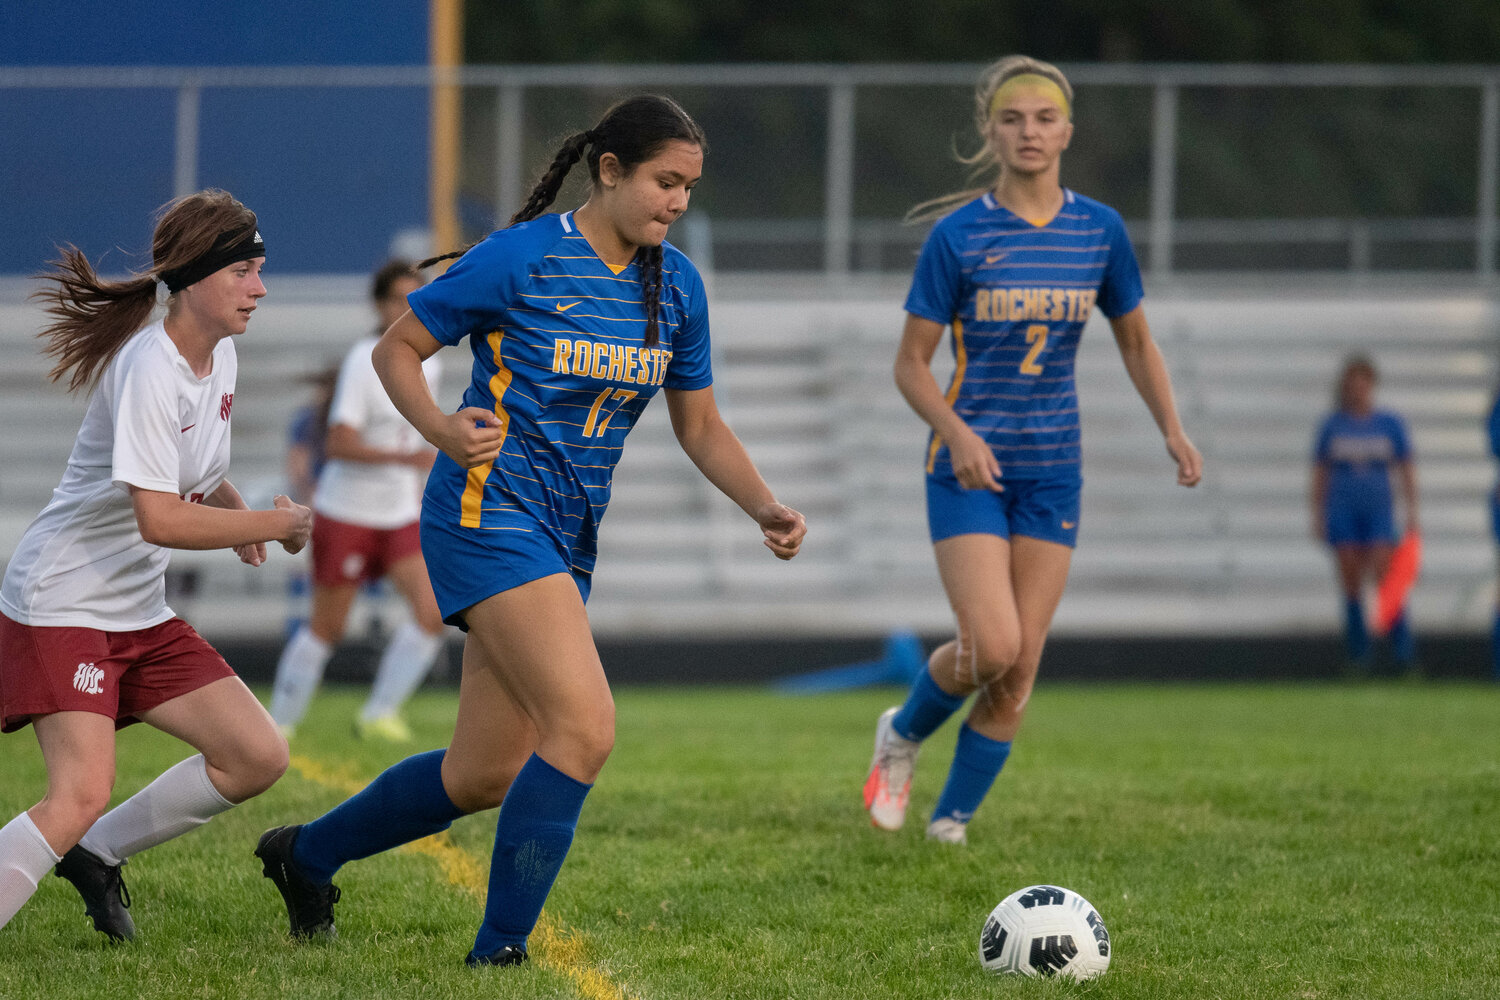 Ariel Maekawa Sanborn dribbles the ball during the second half of Rochester's match against Hoquiam on Sept. 18.